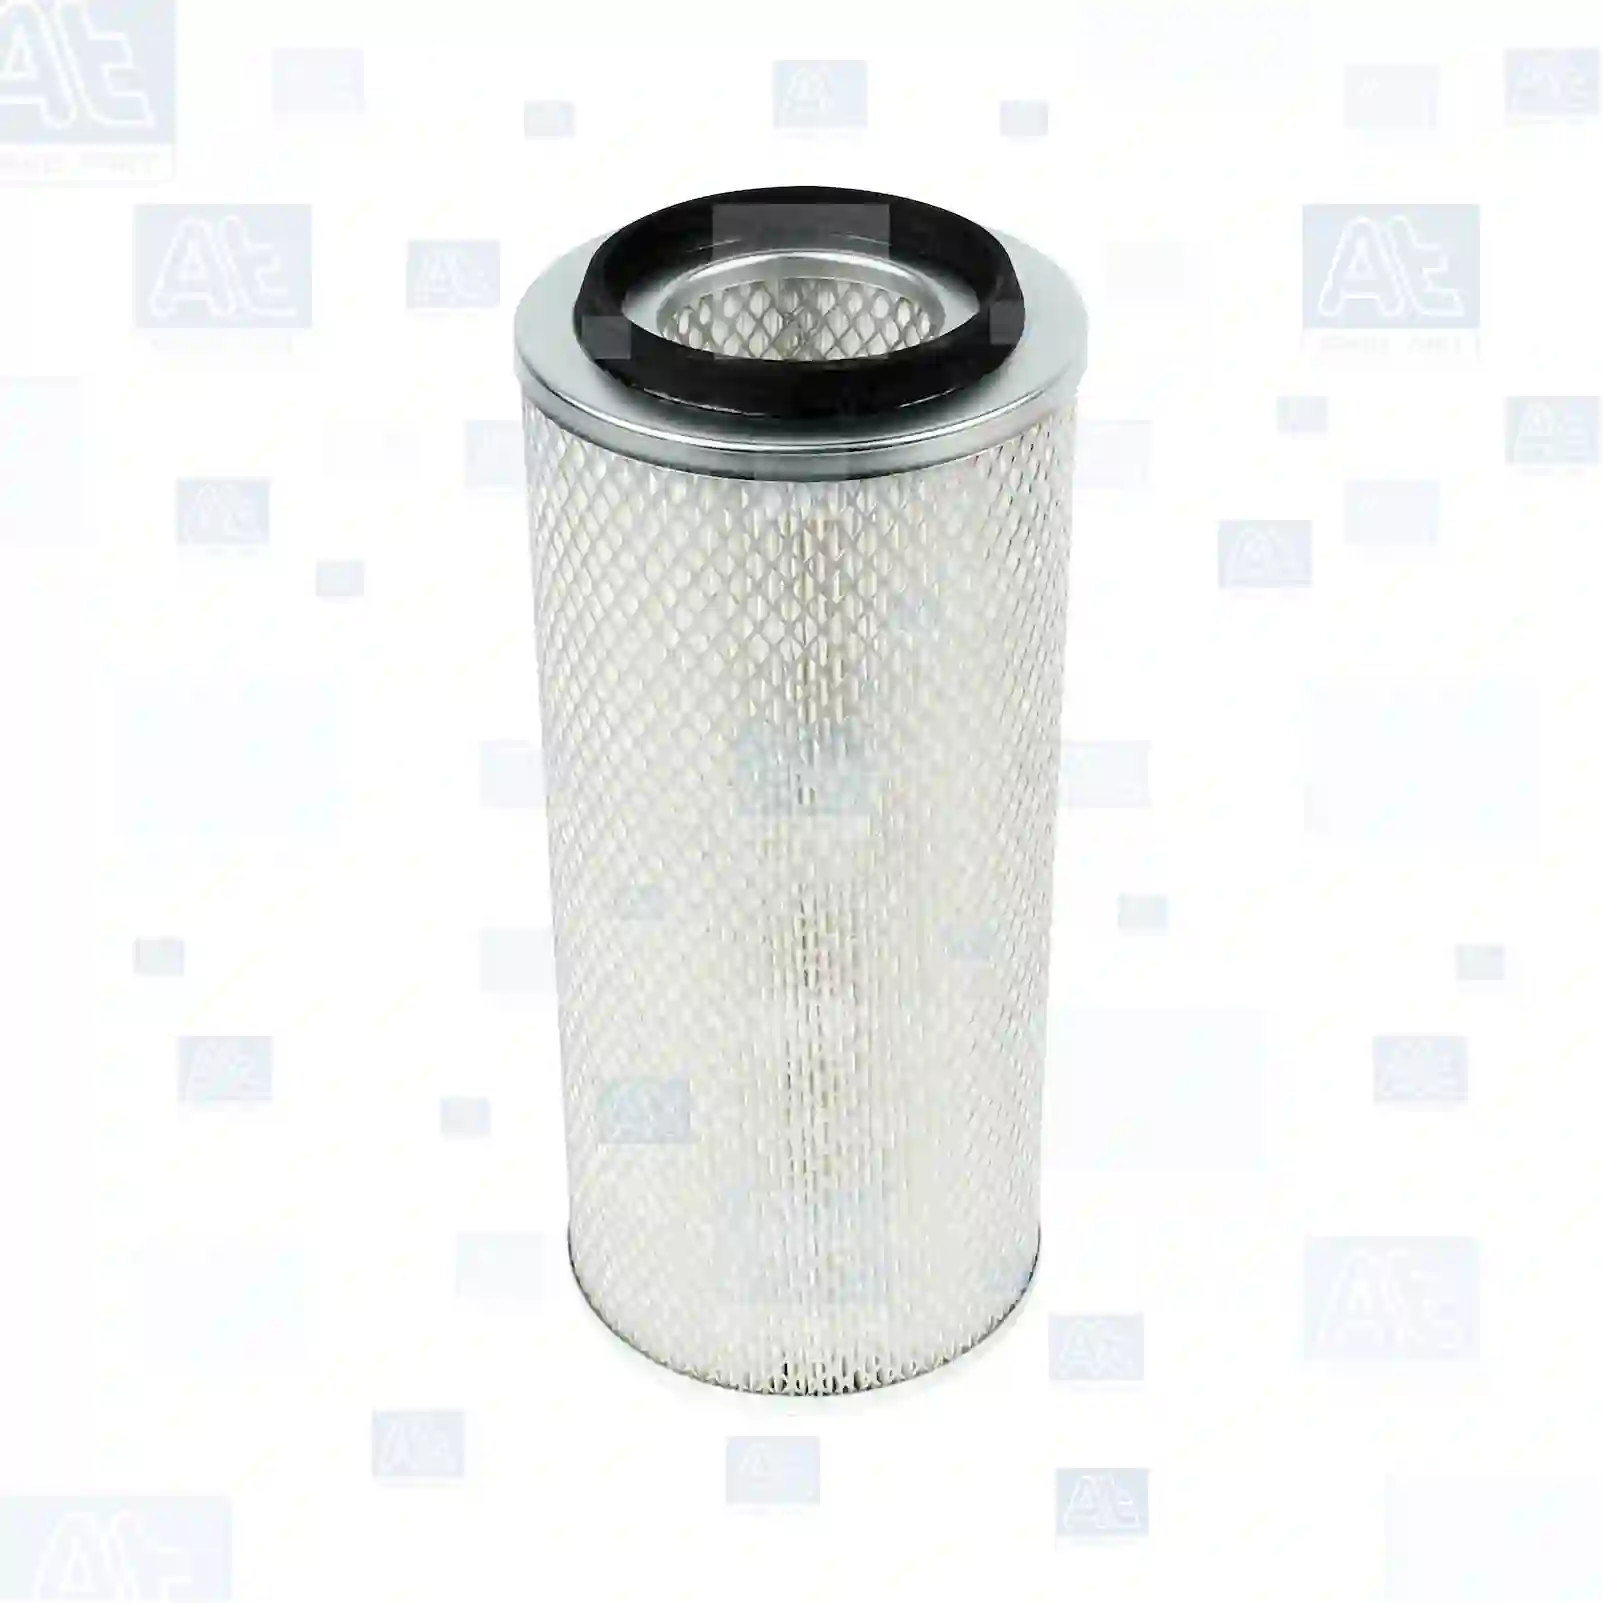  Air Filter Air filter, at no: 77706193 ,  oem no:6006001345009, T06129620, 145412A1, 3146576, 3146576R1, 3I-0837, 9974133, 10948204, 20943404, 0007235610, 0007235611, 1500199, 691733, BBU6549, 07330074, 687745, 68774500, 956591, 95659100, 01902101, 02165038, 02165039, 1111401910300, 1210602017700, 905412970014, 27059900, 634479, 5106022072, 1111401910300, 1210602017700, 2165039, 0746725, 2165039, F178200090010, G178200090010, 9839014, 01902101, 01902121, 01904581, 02165038, 02165039, 09927846, 09985779, Y05767209, Y05769012, 5011304, 5011314, 5011547, 90137364, 9974133, 9059547, 93240236, 9974133, 0009839014, 2954346M1, 3146576R1, 00634479, 01902101, 01902121, 01904581, 02165038, 02165039, 09927846, 09985779, 1902101, 1904581, 2165039, 42553200, 500038758, 503471098, 75204063, 9927846, 9985779, AZ18968, 02165038, 02165039, 0009930706, LA913, 35873-1121-1, 5106180, 7002403, 04516555224, 04516592304, 1887575M91, 2710804, 2954346M1, 0010948204, 0020943404, 0030943204, 0040948004, 8319130156, 3146576R1, 16546-G9601, 842284, 634479, 931465576R1, 93146576R1, 2710804M1, 250590, F0250590, F250590, 41185190010, 905412970014, 0003563570, 5430028794, 6005019673, R804, 5106180, BBU6549, 8319130156, SA6028, 141185190010, 41105190703, 41185190010, 44185190010, 27059900, 17700-98004, 17700-98005, 17811-98003, 16546G9601, 800619, 82640300, CH12231, T06129620, ZG00863-0008 At Spare Part | Engine, Accelerator Pedal, Camshaft, Connecting Rod, Crankcase, Crankshaft, Cylinder Head, Engine Suspension Mountings, Exhaust Manifold, Exhaust Gas Recirculation, Filter Kits, Flywheel Housing, General Overhaul Kits, Engine, Intake Manifold, Oil Cleaner, Oil Cooler, Oil Filter, Oil Pump, Oil Sump, Piston & Liner, Sensor & Switch, Timing Case, Turbocharger, Cooling System, Belt Tensioner, Coolant Filter, Coolant Pipe, Corrosion Prevention Agent, Drive, Expansion Tank, Fan, Intercooler, Monitors & Gauges, Radiator, Thermostat, V-Belt / Timing belt, Water Pump, Fuel System, Electronical Injector Unit, Feed Pump, Fuel Filter, cpl., Fuel Gauge Sender,  Fuel Line, Fuel Pump, Fuel Tank, Injection Line Kit, Injection Pump, Exhaust System, Clutch & Pedal, Gearbox, Propeller Shaft, Axles, Brake System, Hubs & Wheels, Suspension, Leaf Spring, Universal Parts / Accessories, Steering, Electrical System, Cabin